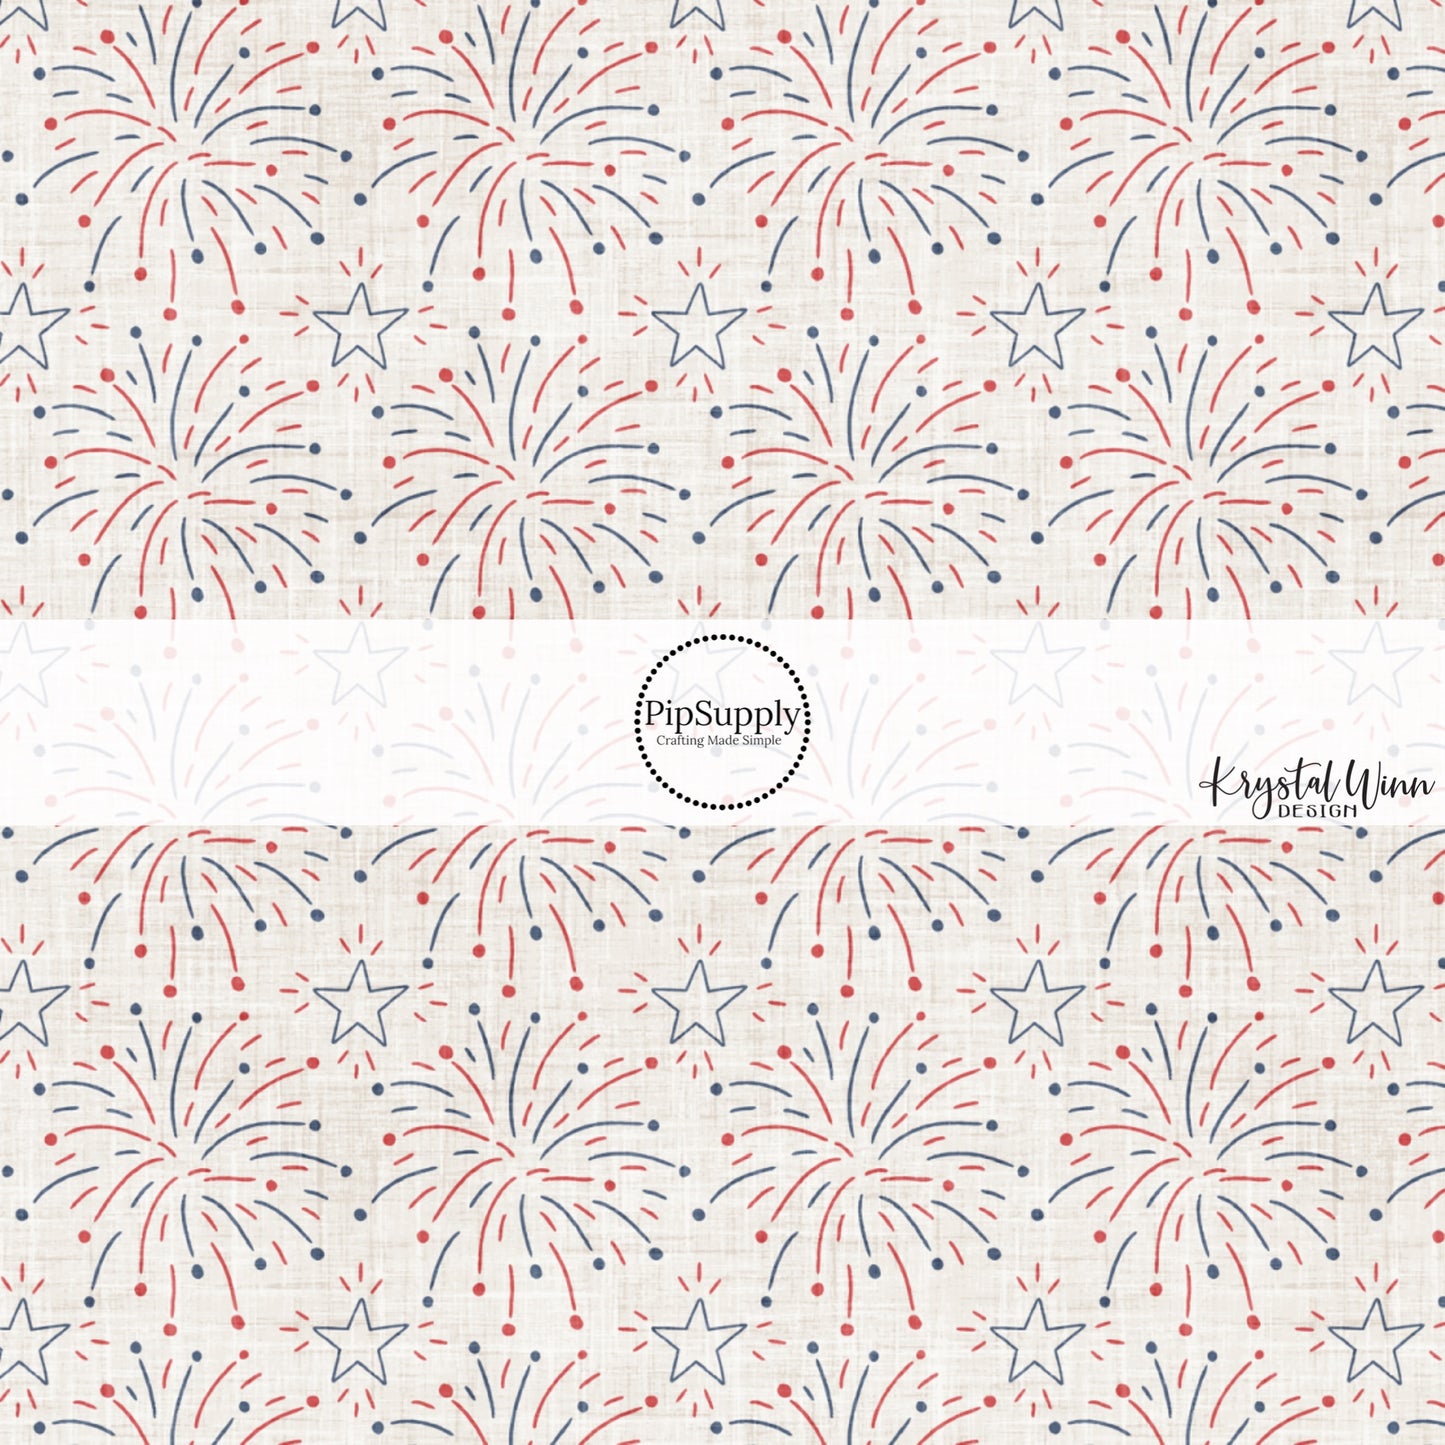 This 4th of July fabric by the yard features patriotic red and blue fireworks on cream. This fun patriotic themed fabric can be used for all your sewing and crafting needs!